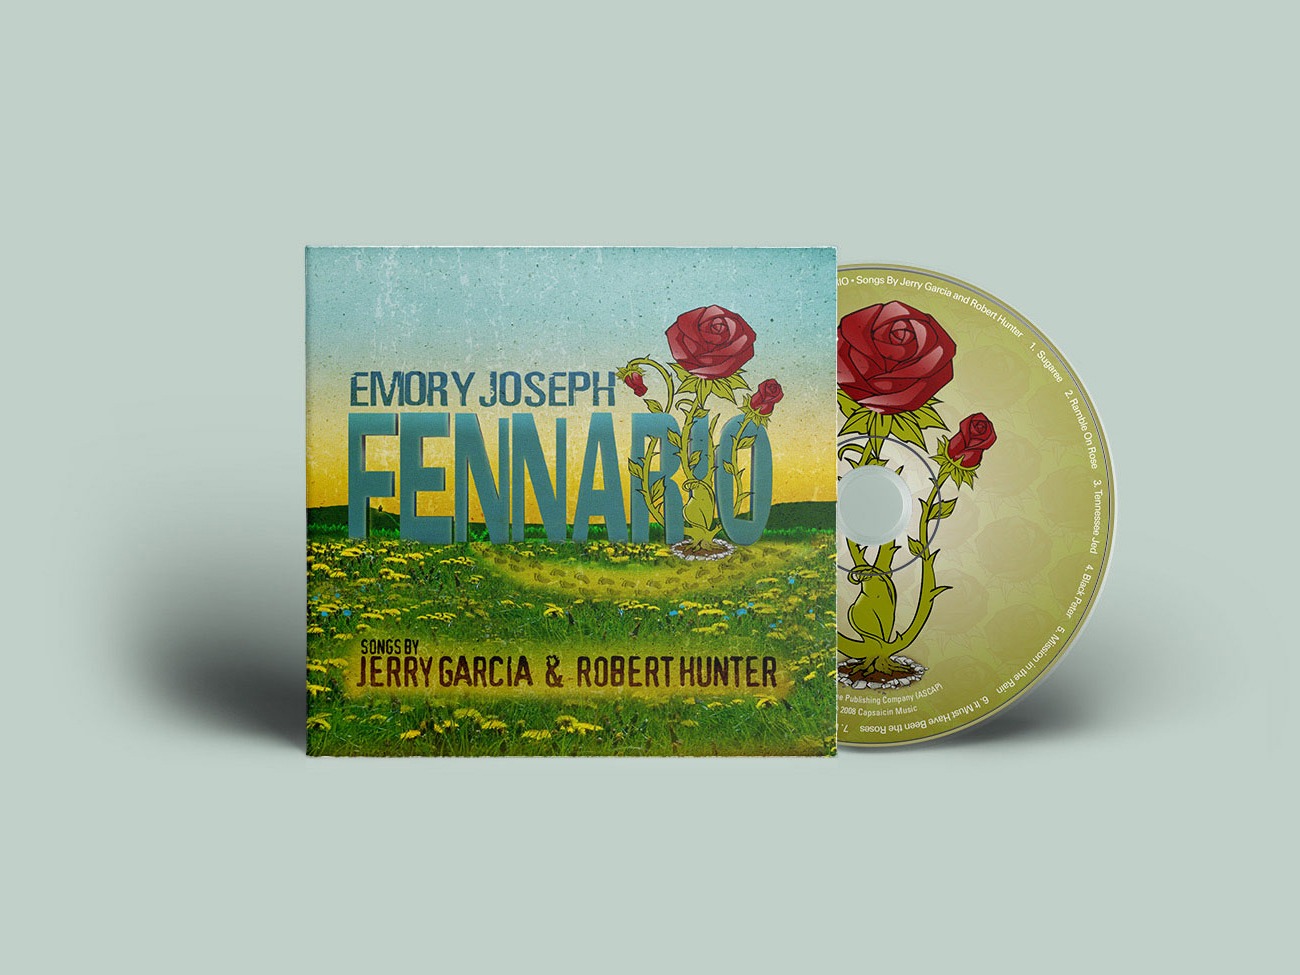 Emory Joseph Fennario - Songs by Jerry Garcia and Robert Hunter - CD Cover and Package Design